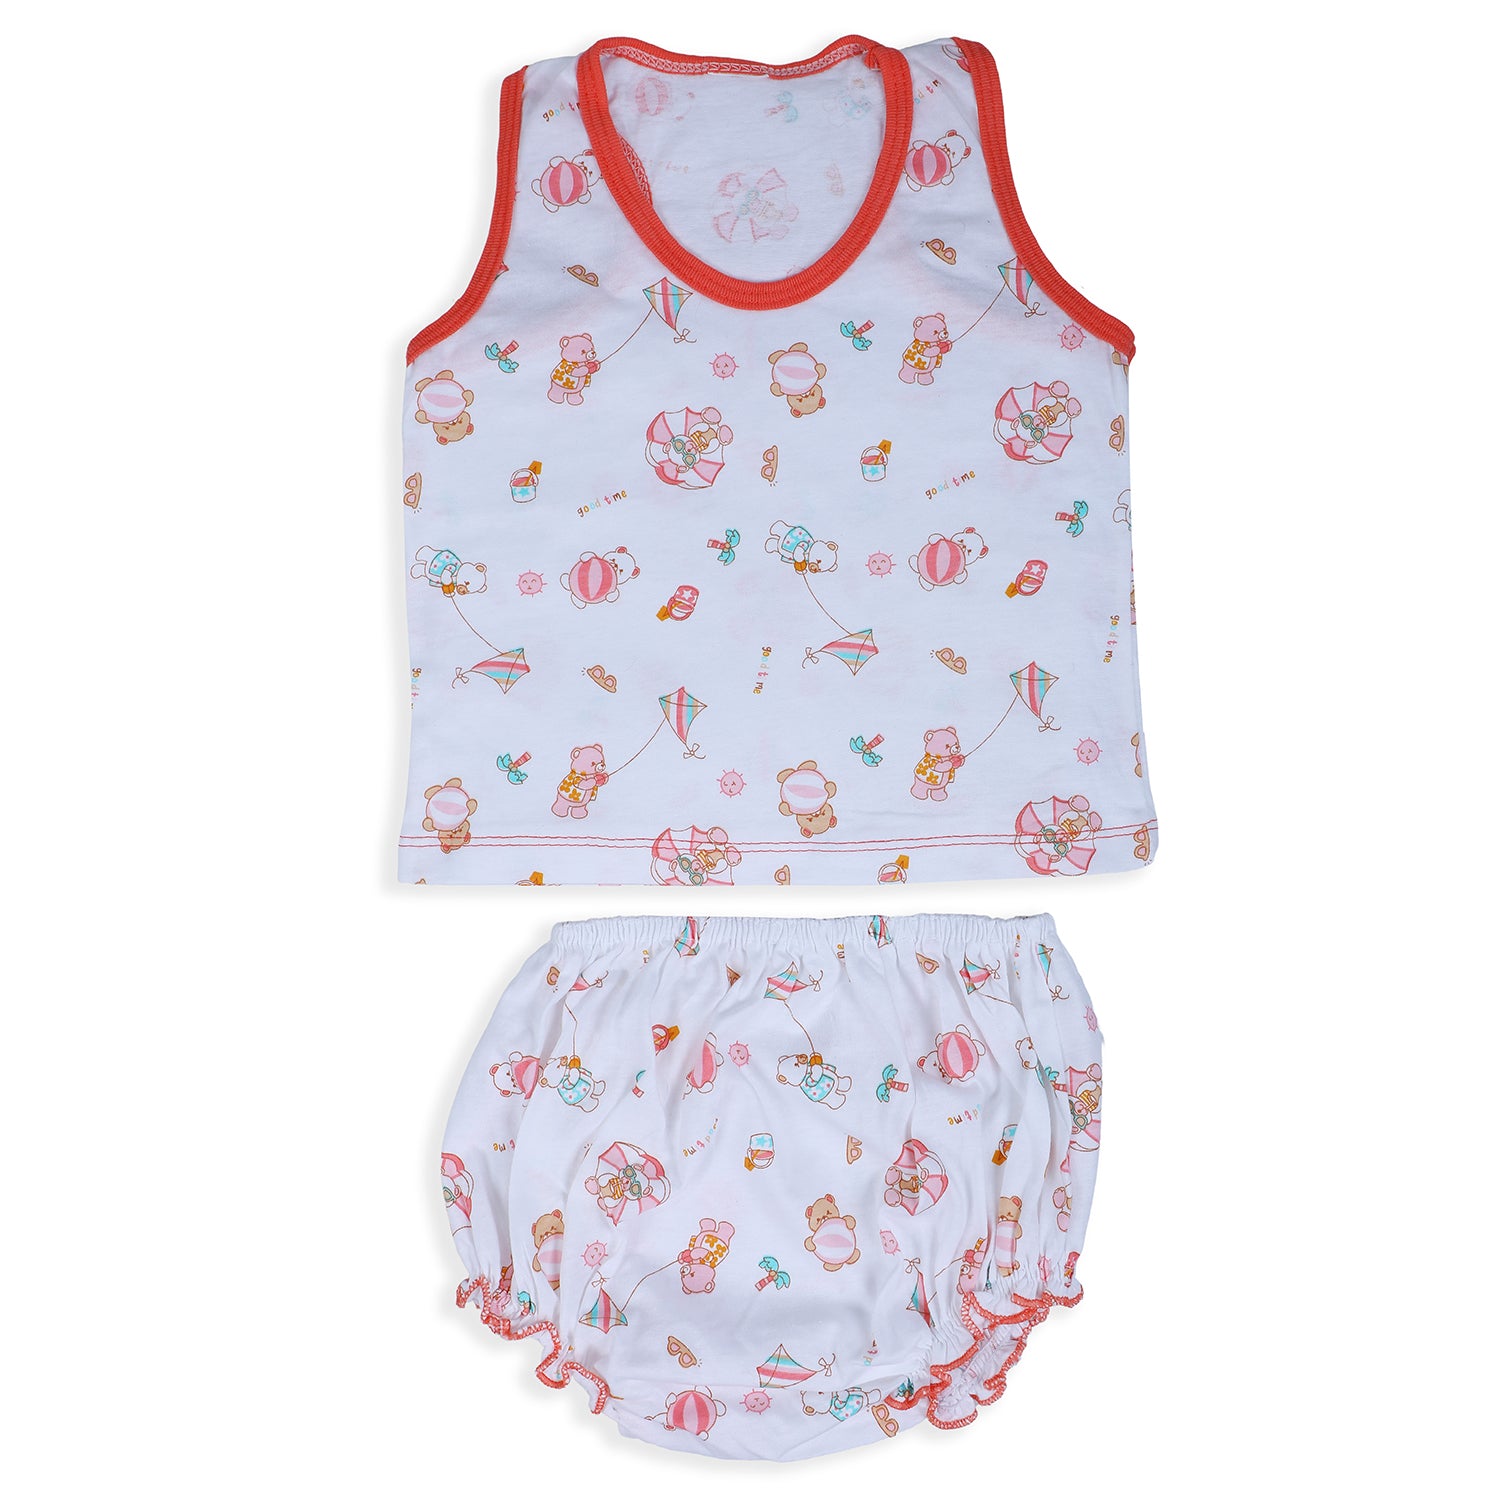 Baby Moo Kite Flying Bear Pure Cotton Sleeveless Vest With Matching Bottom 2pcs Set - Red